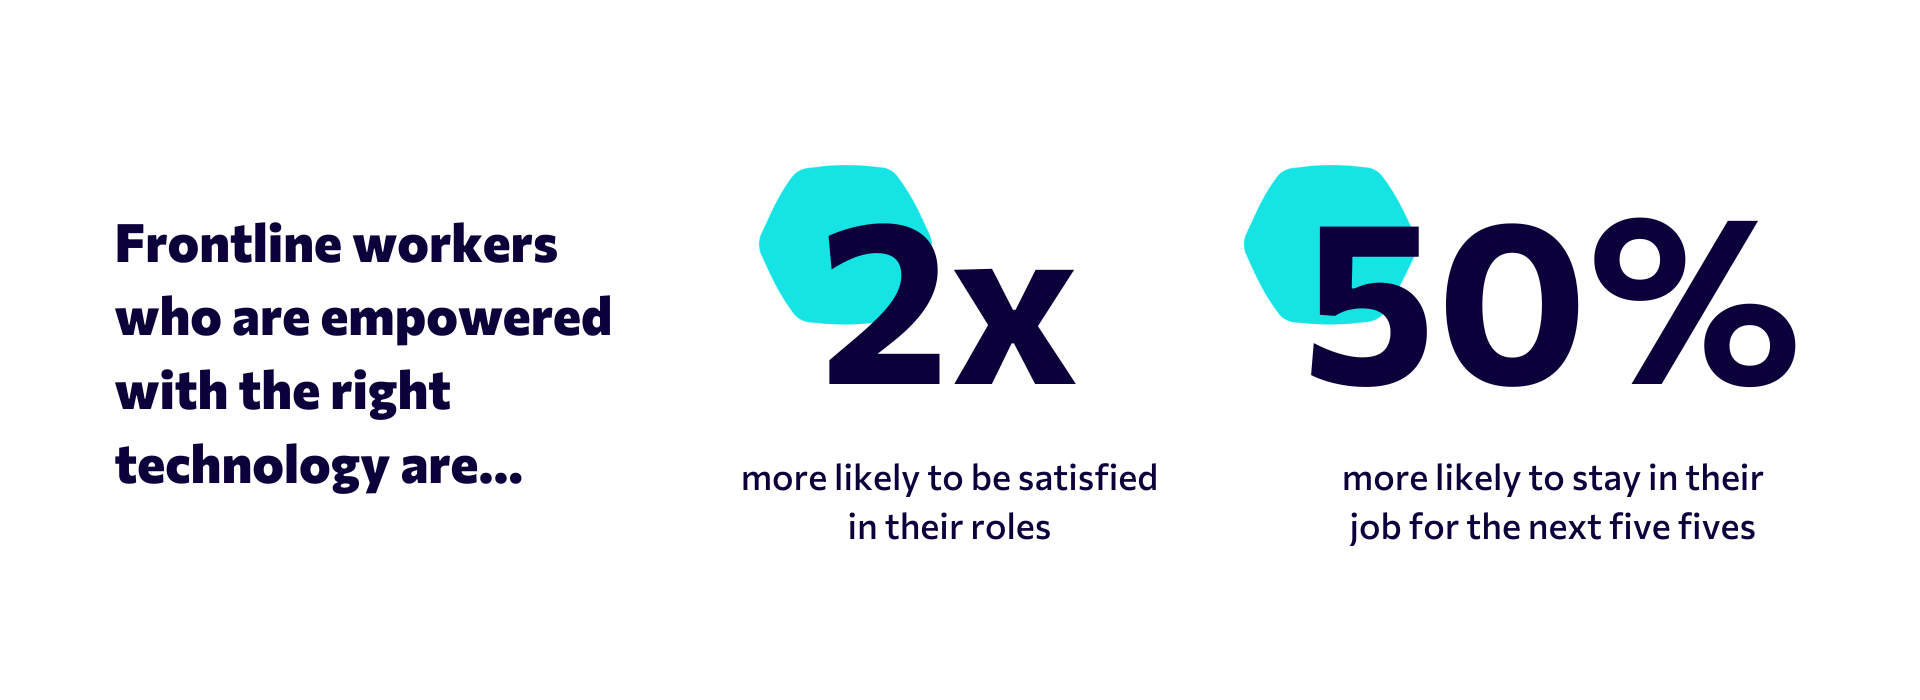 Frontline workers who are empowered with the right tech are 2x more likely to be satisfied in their roles and 50% more likely to stay for the next five years